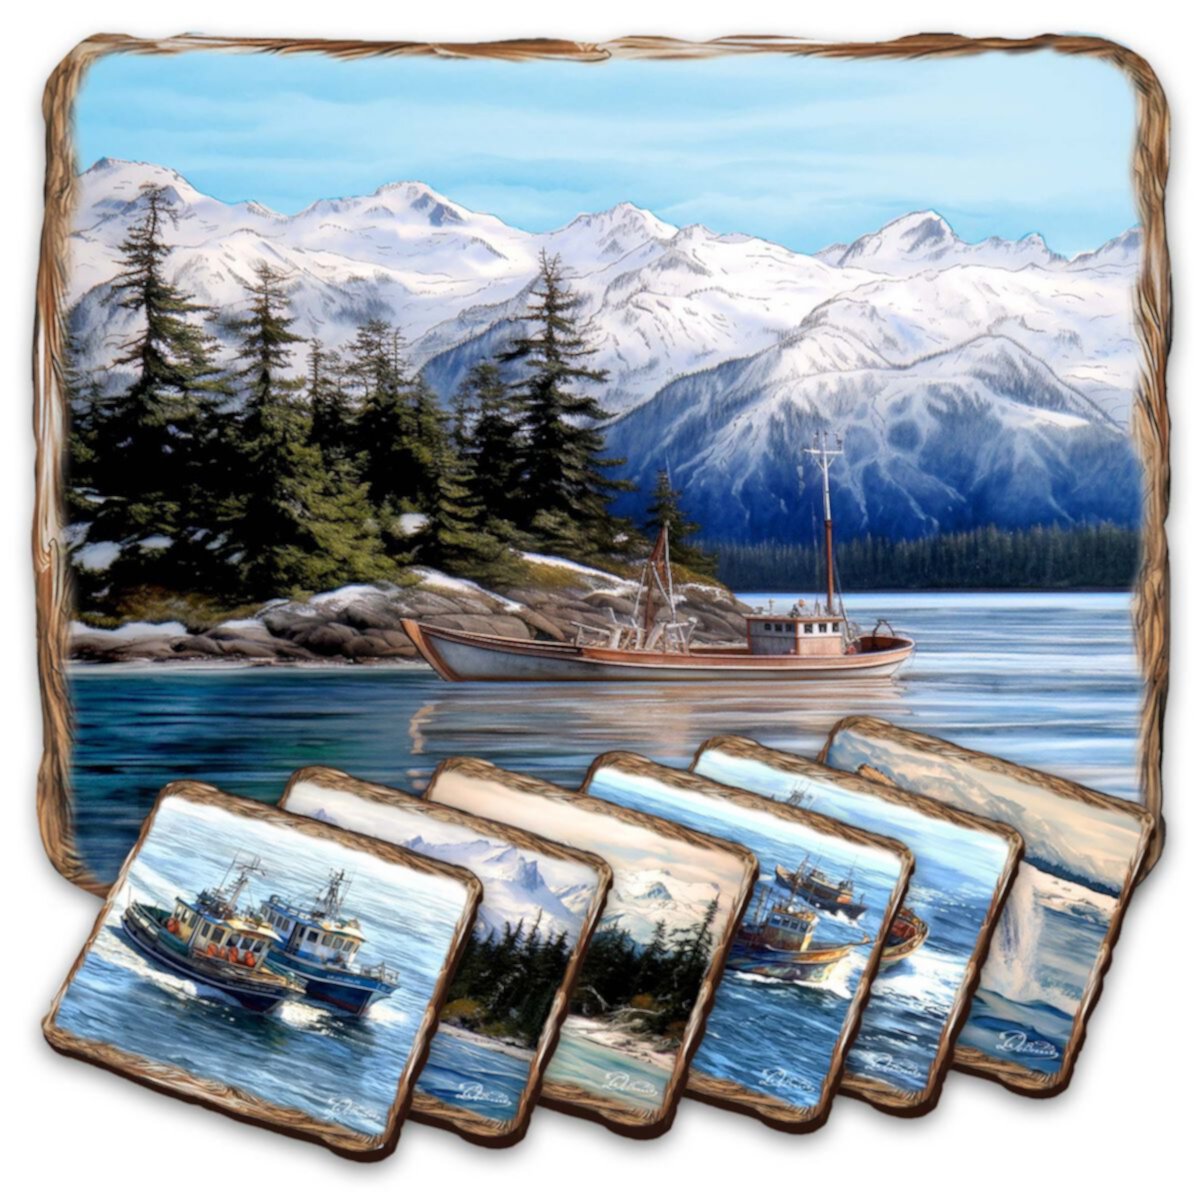 Fishing Boats Wooden Cork Placemat And Coasters Gift Set Of 7 Nature Wonders